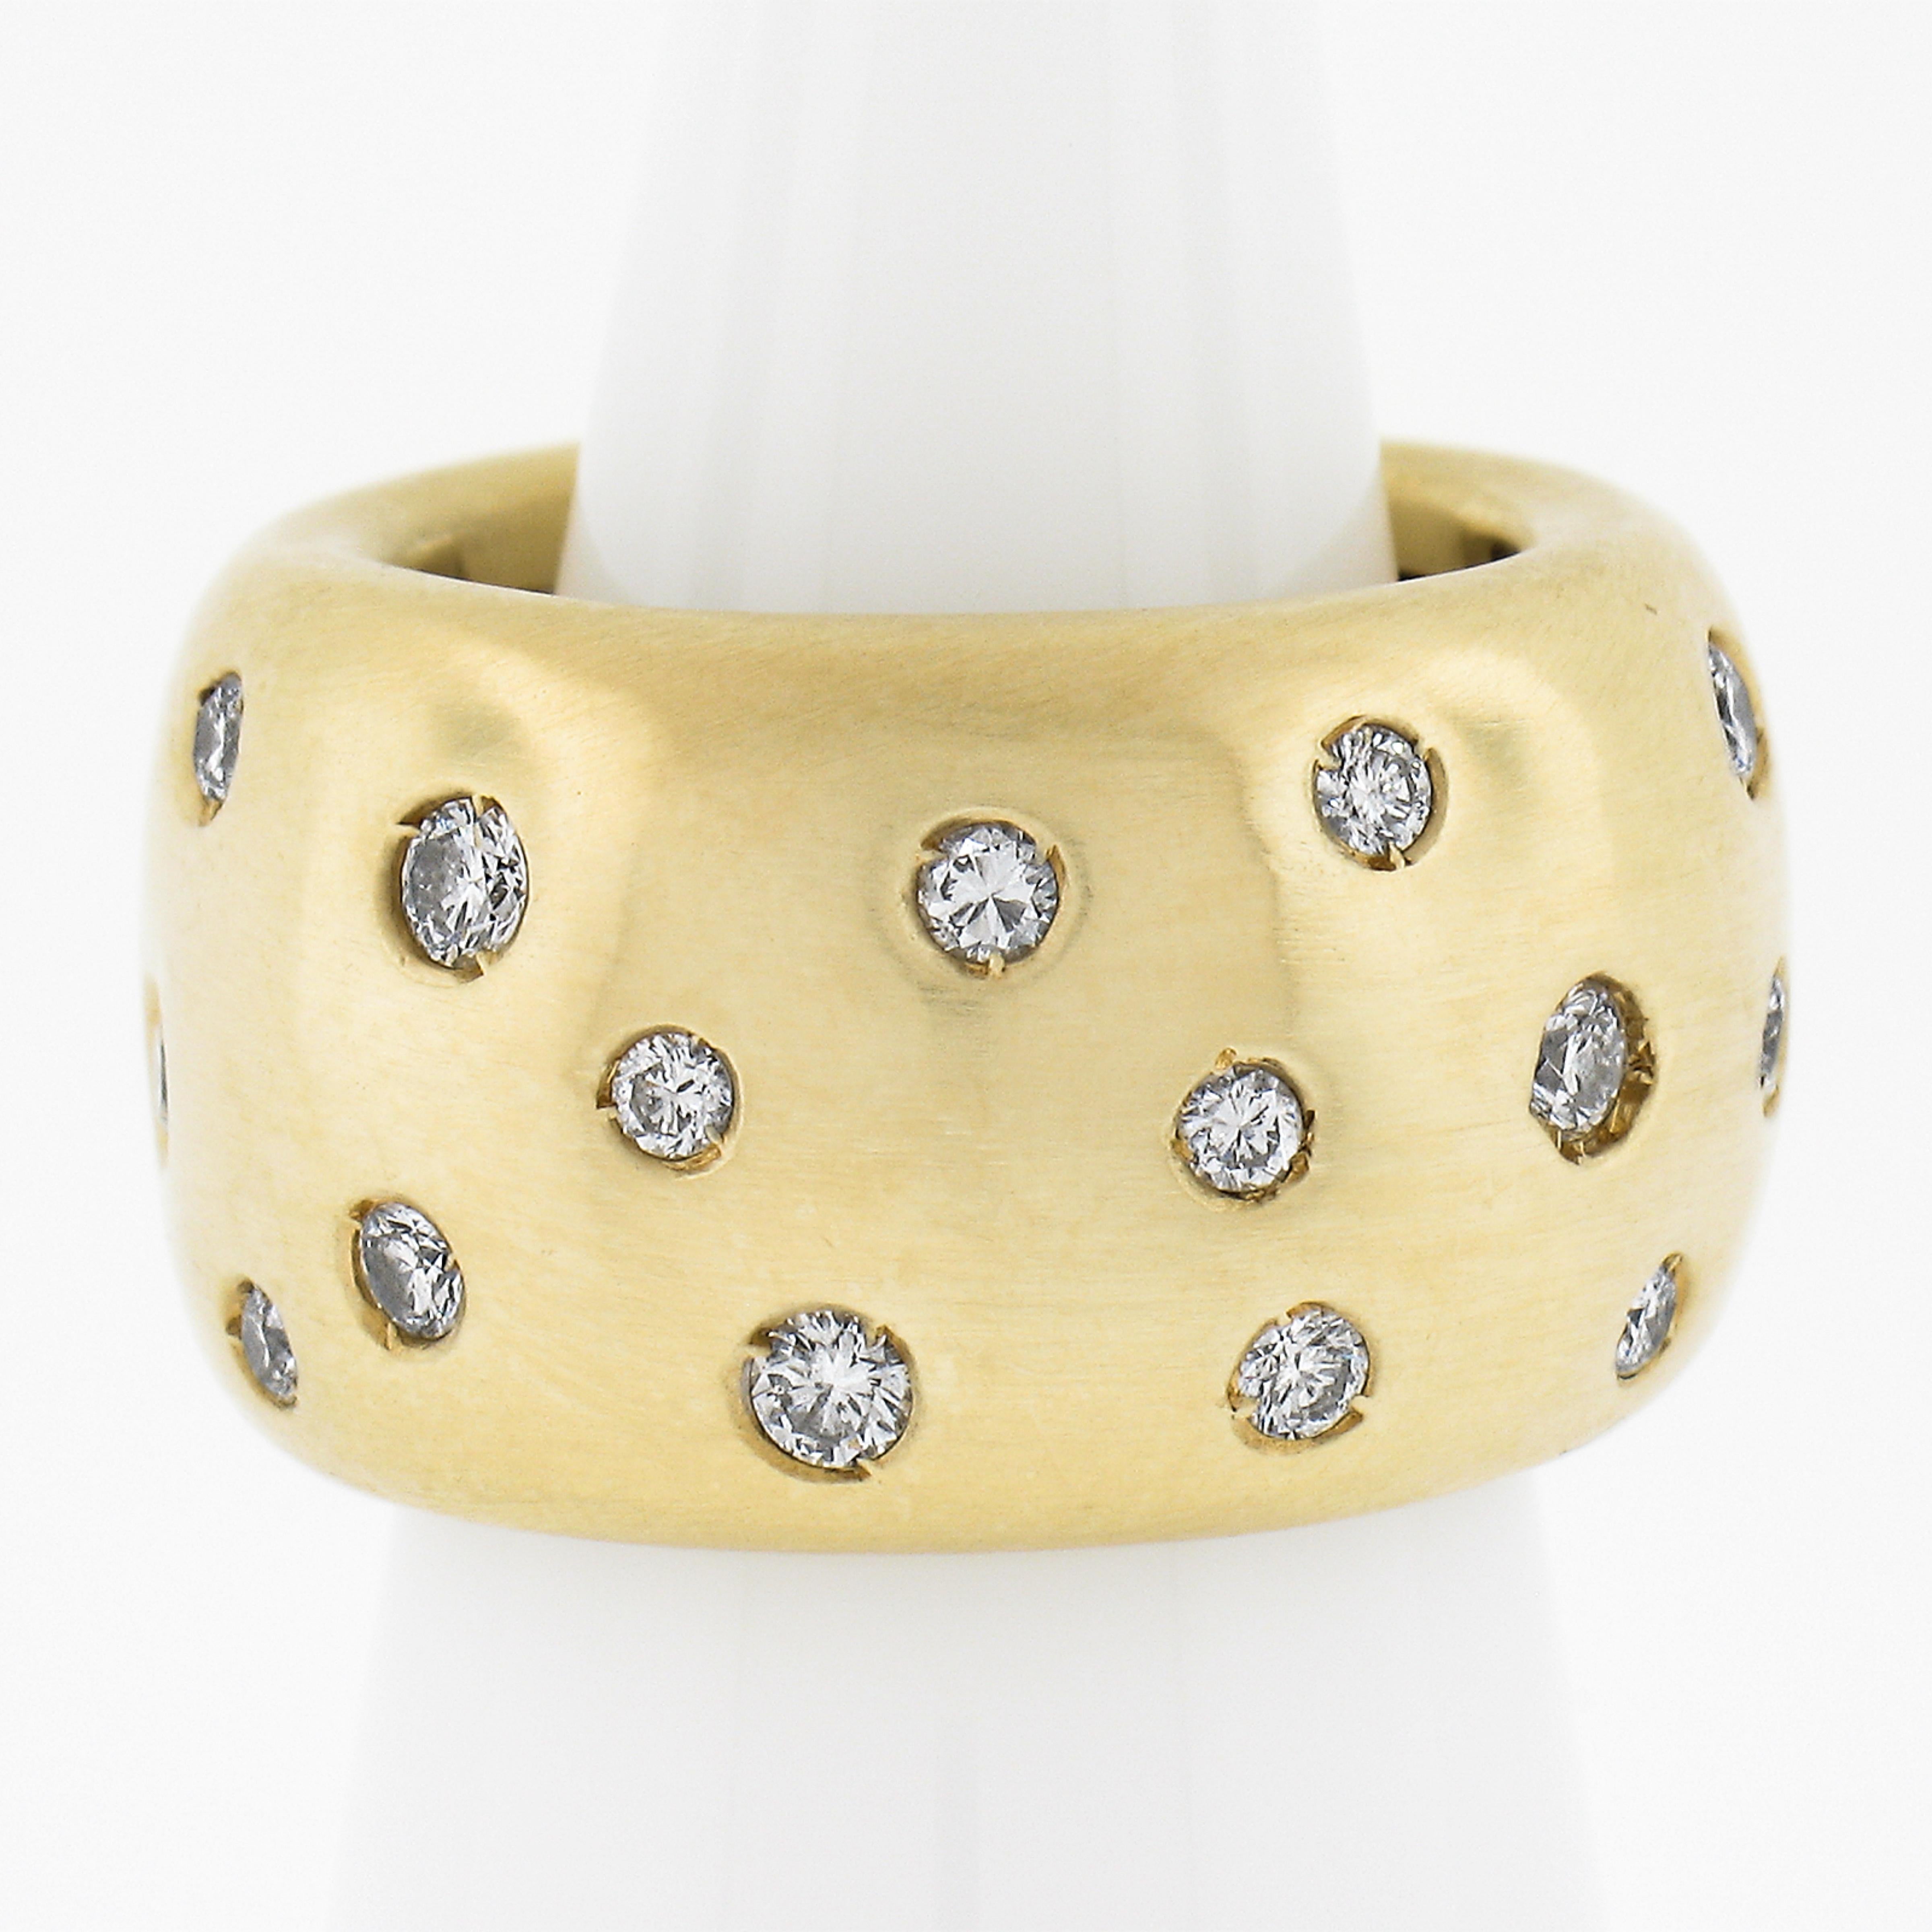 --Stone(s):--
(27) Natural Genuine Diamonds - Round Brilliant Cut - Flush Burnish Set - G-I Color - VS2-I1 Clarity
Total Carat Weight: 0.75 (approx.)

Material: Solid 18k Yellow Gold
Weight: 15 Grams
Ring Size: 4.5 (Fitted on a finger. We can NOT